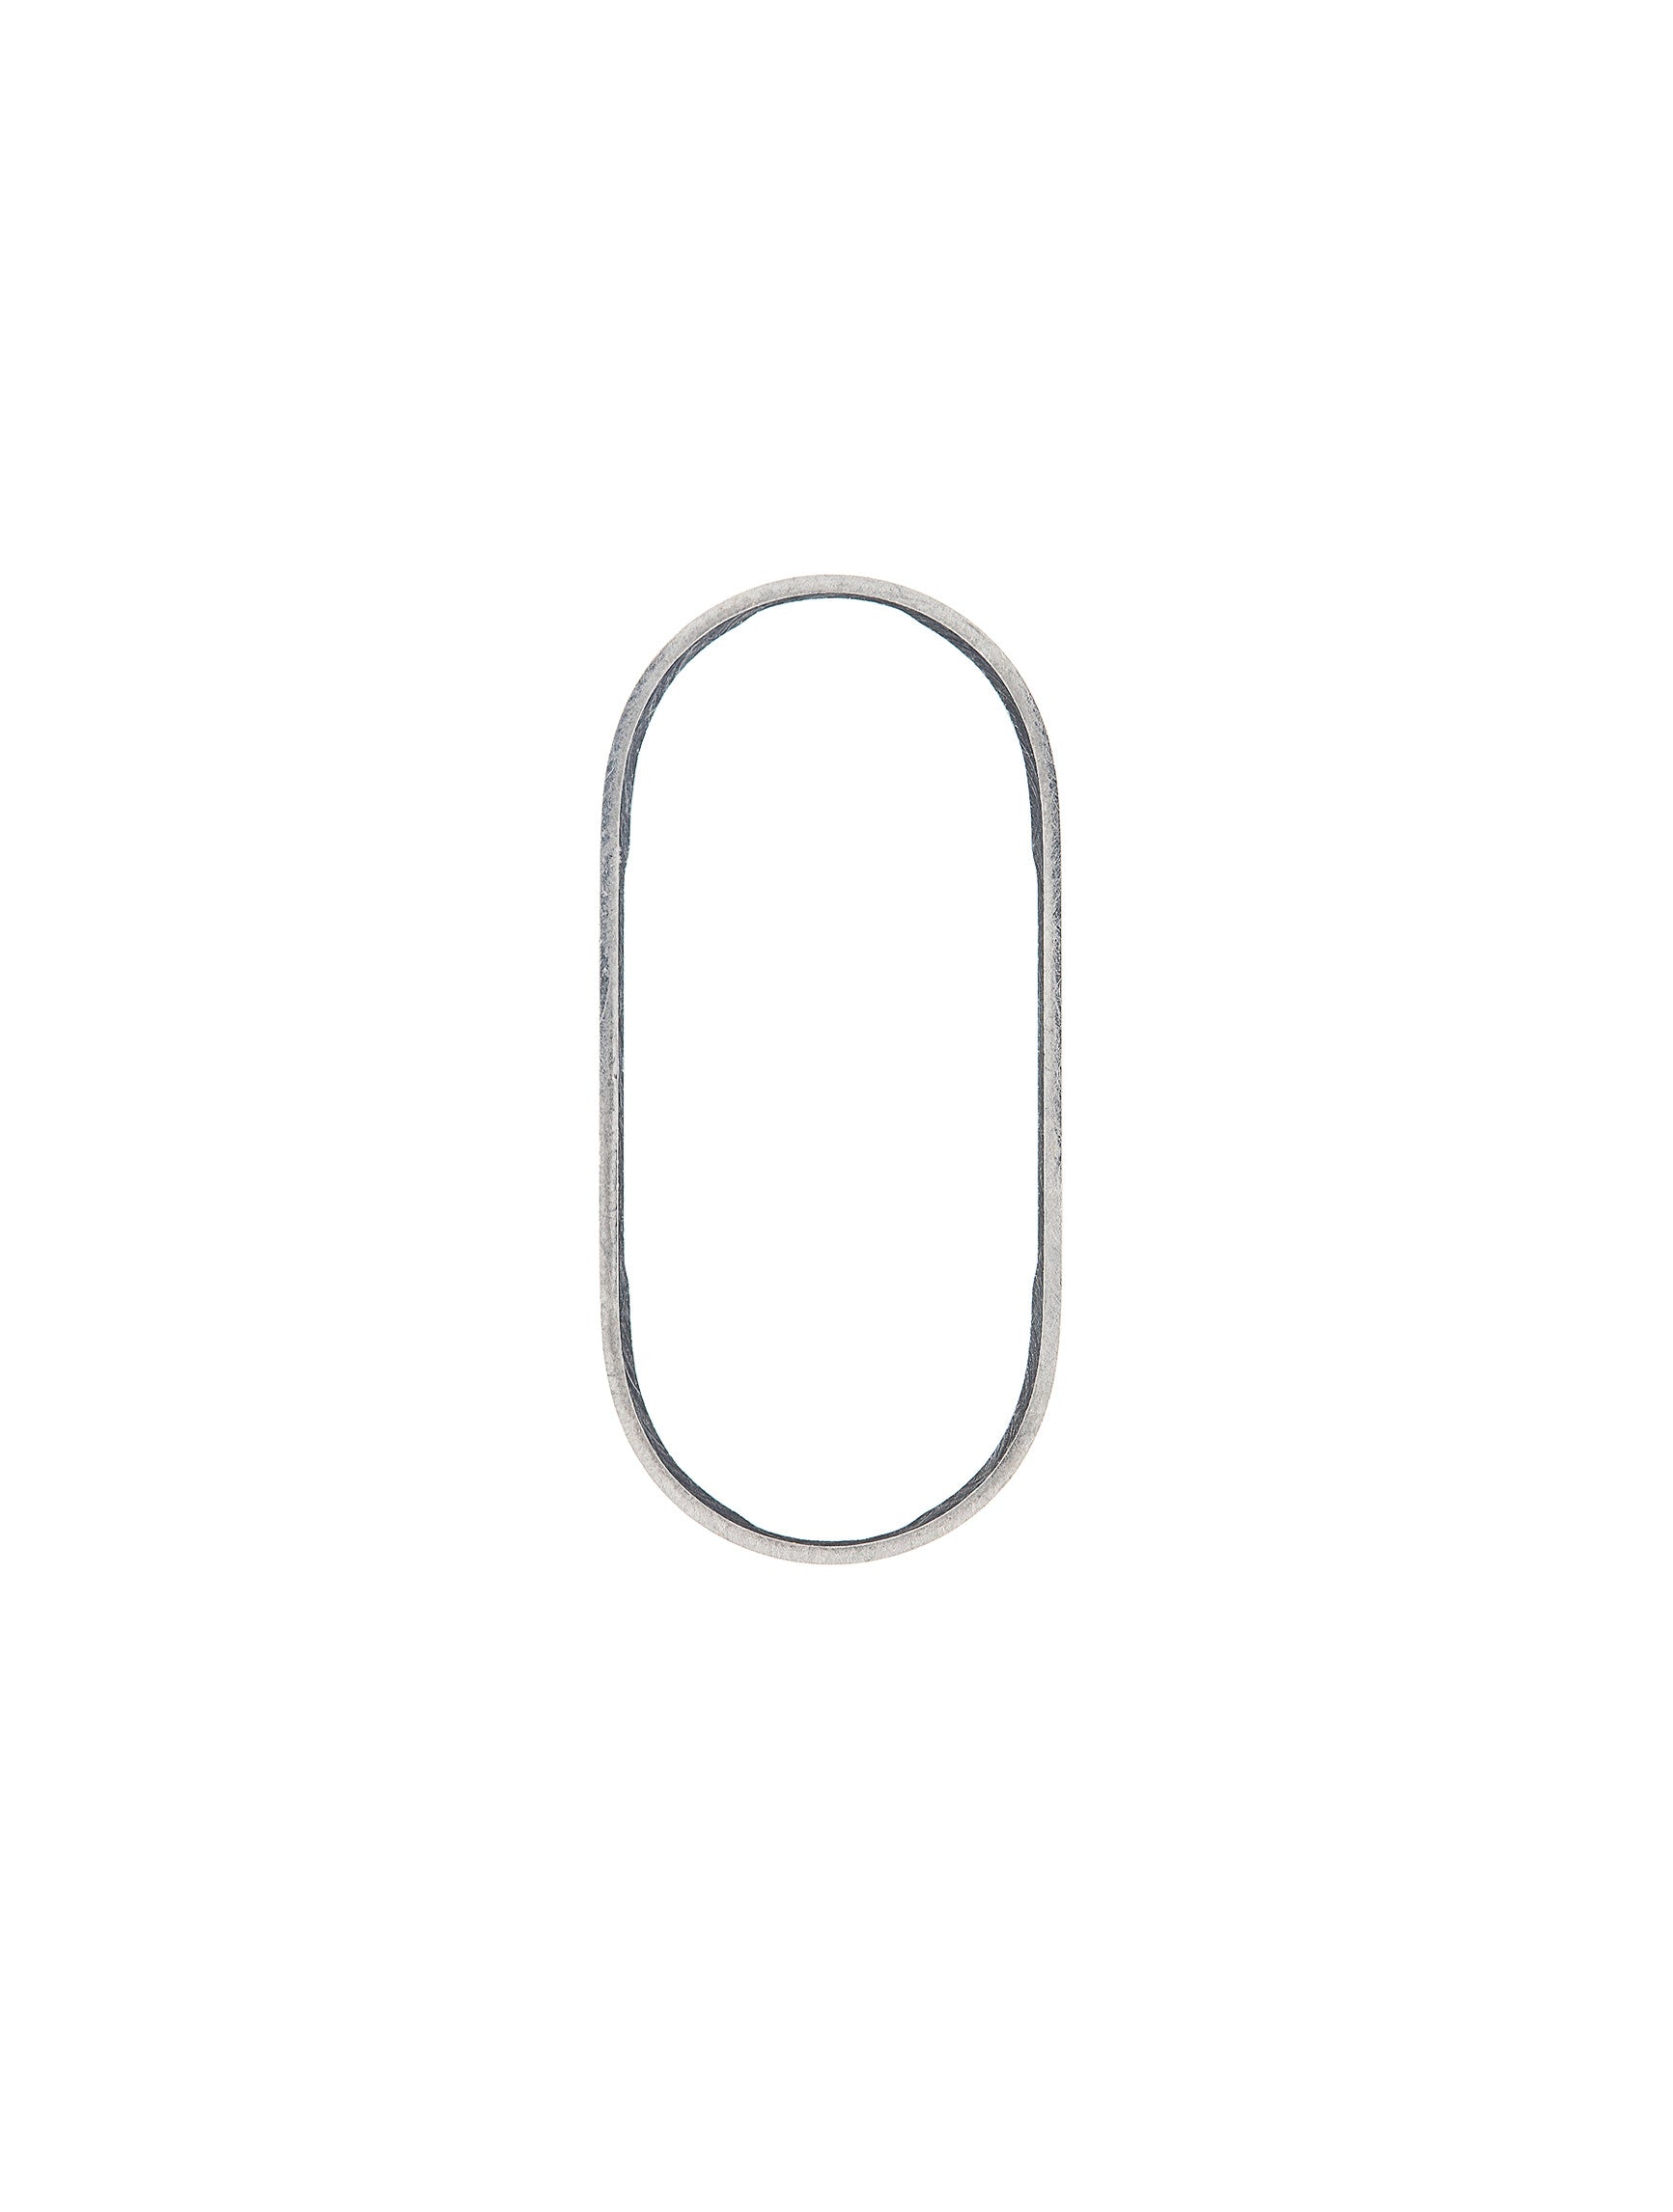 SILVER BACK CAMERA BEZEL RING ONLY (10 PACK) COMPATIBLE WITH IPHONE X